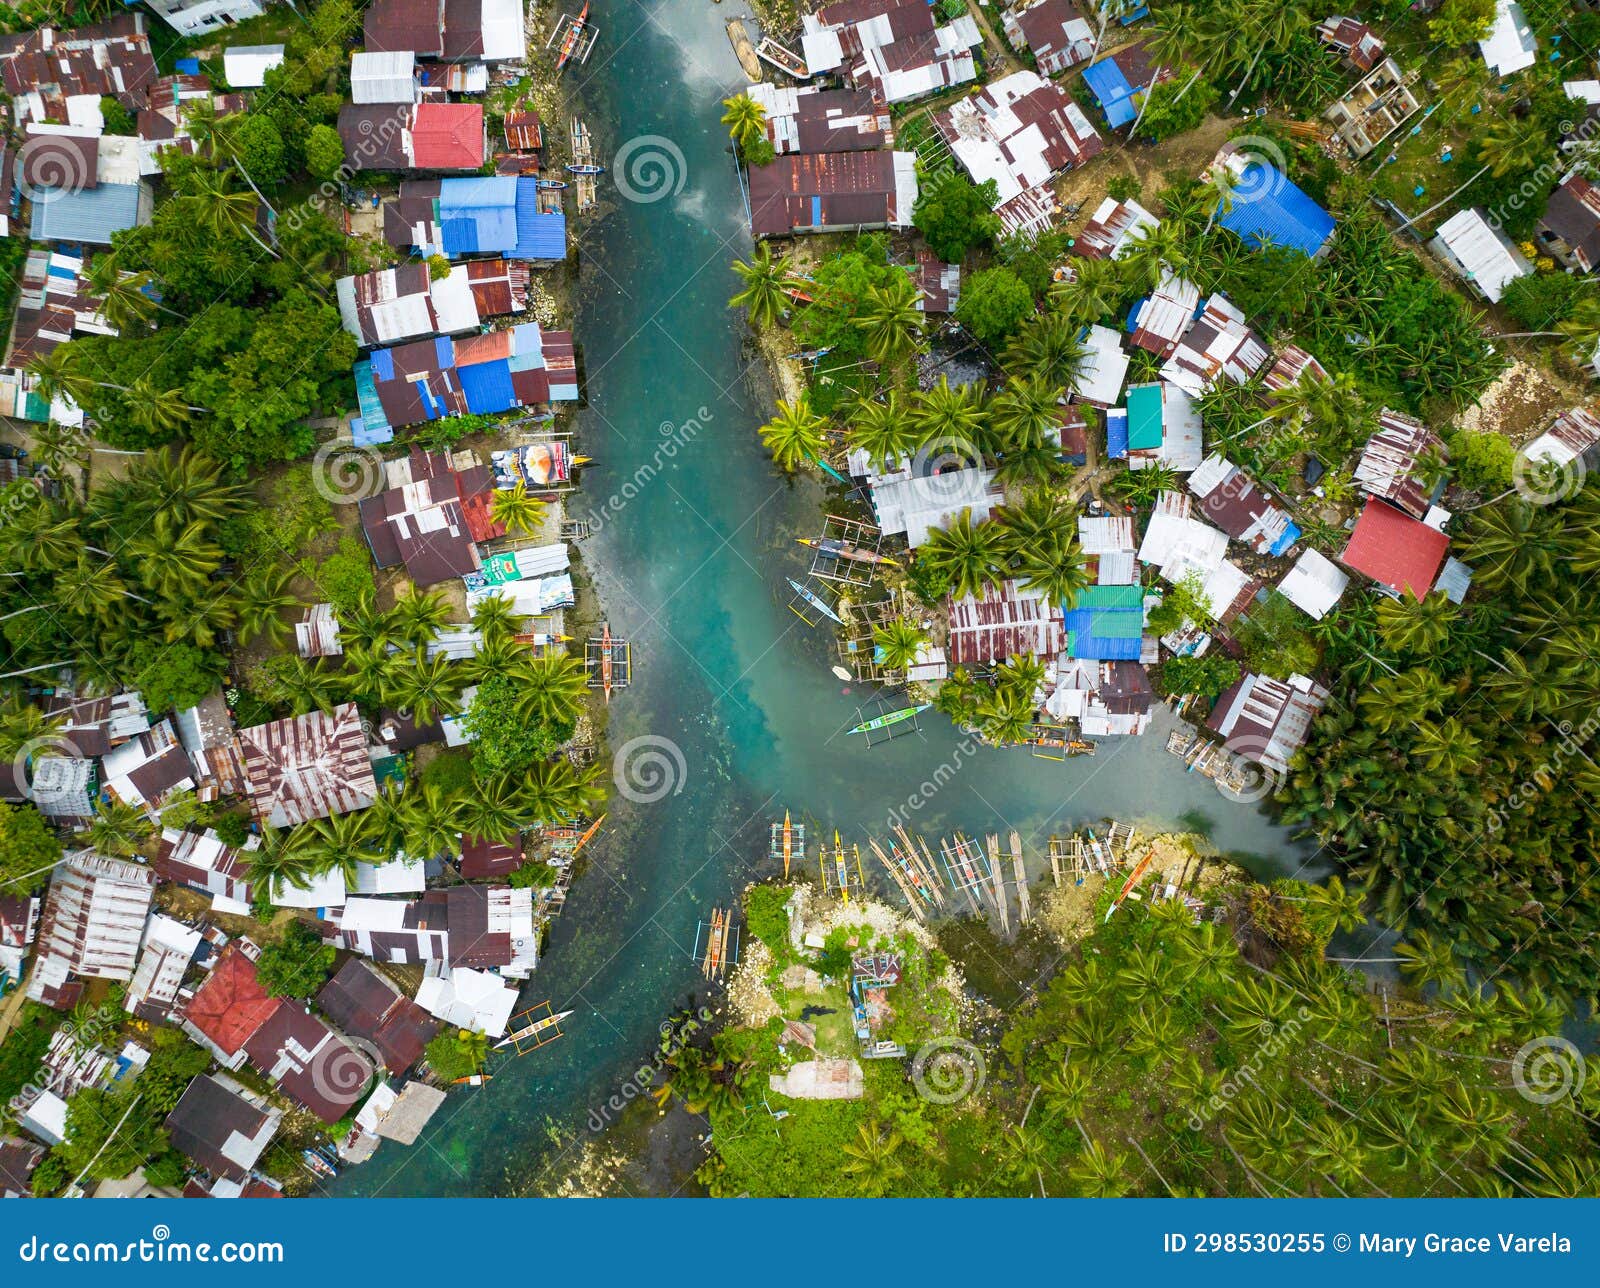 fishermen houses and cold spring in surigao del sur. philippines.